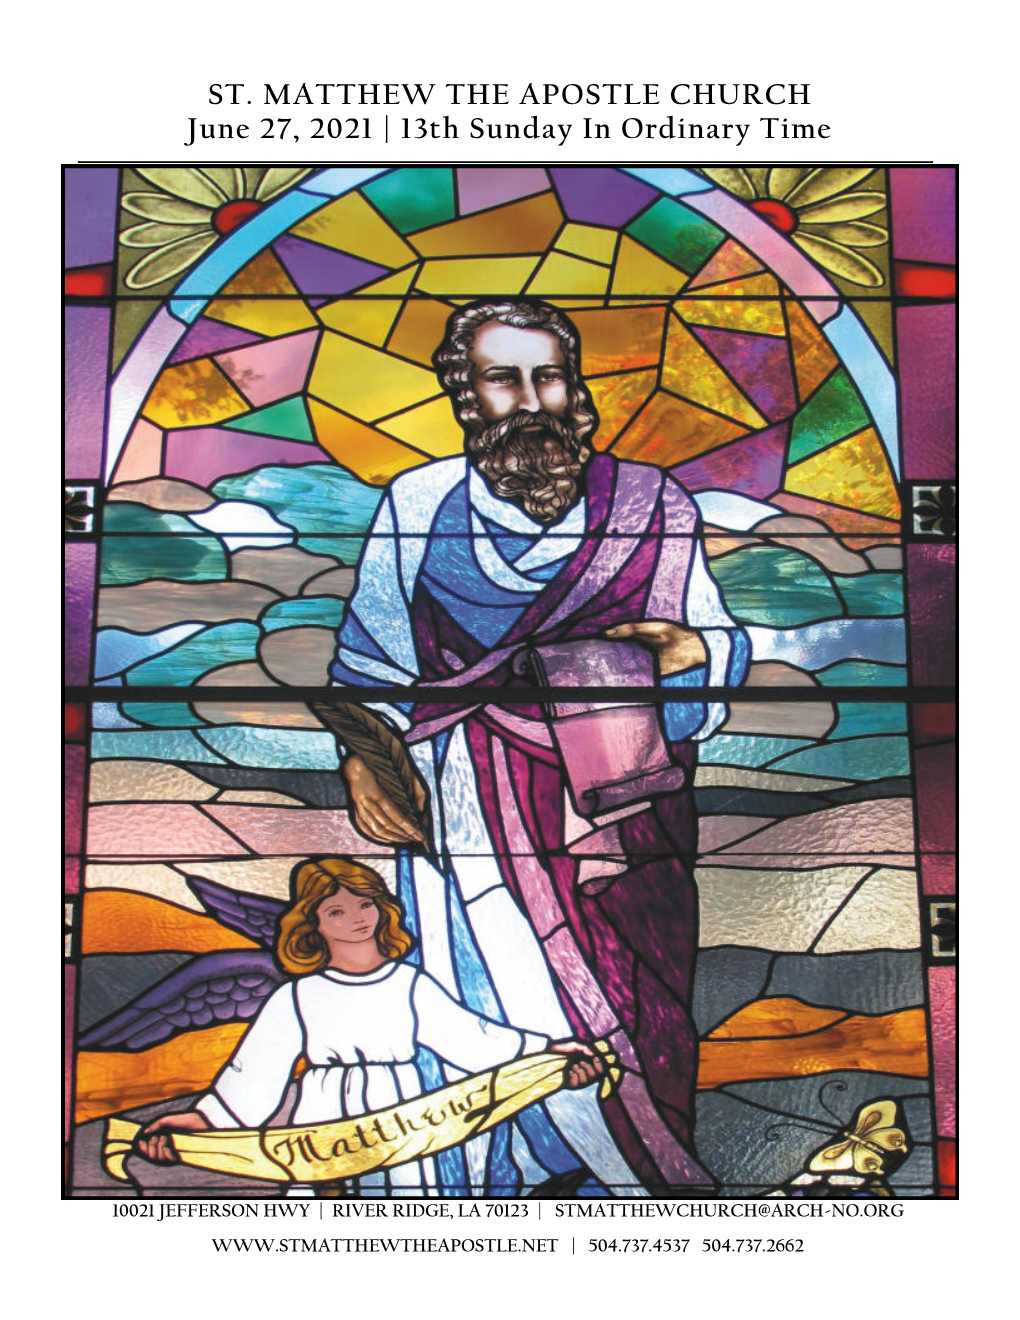 ST. MATTHEW the APOSTLE CHURCH June 27, 2021 | 13Th Sunday in Ordinary Time